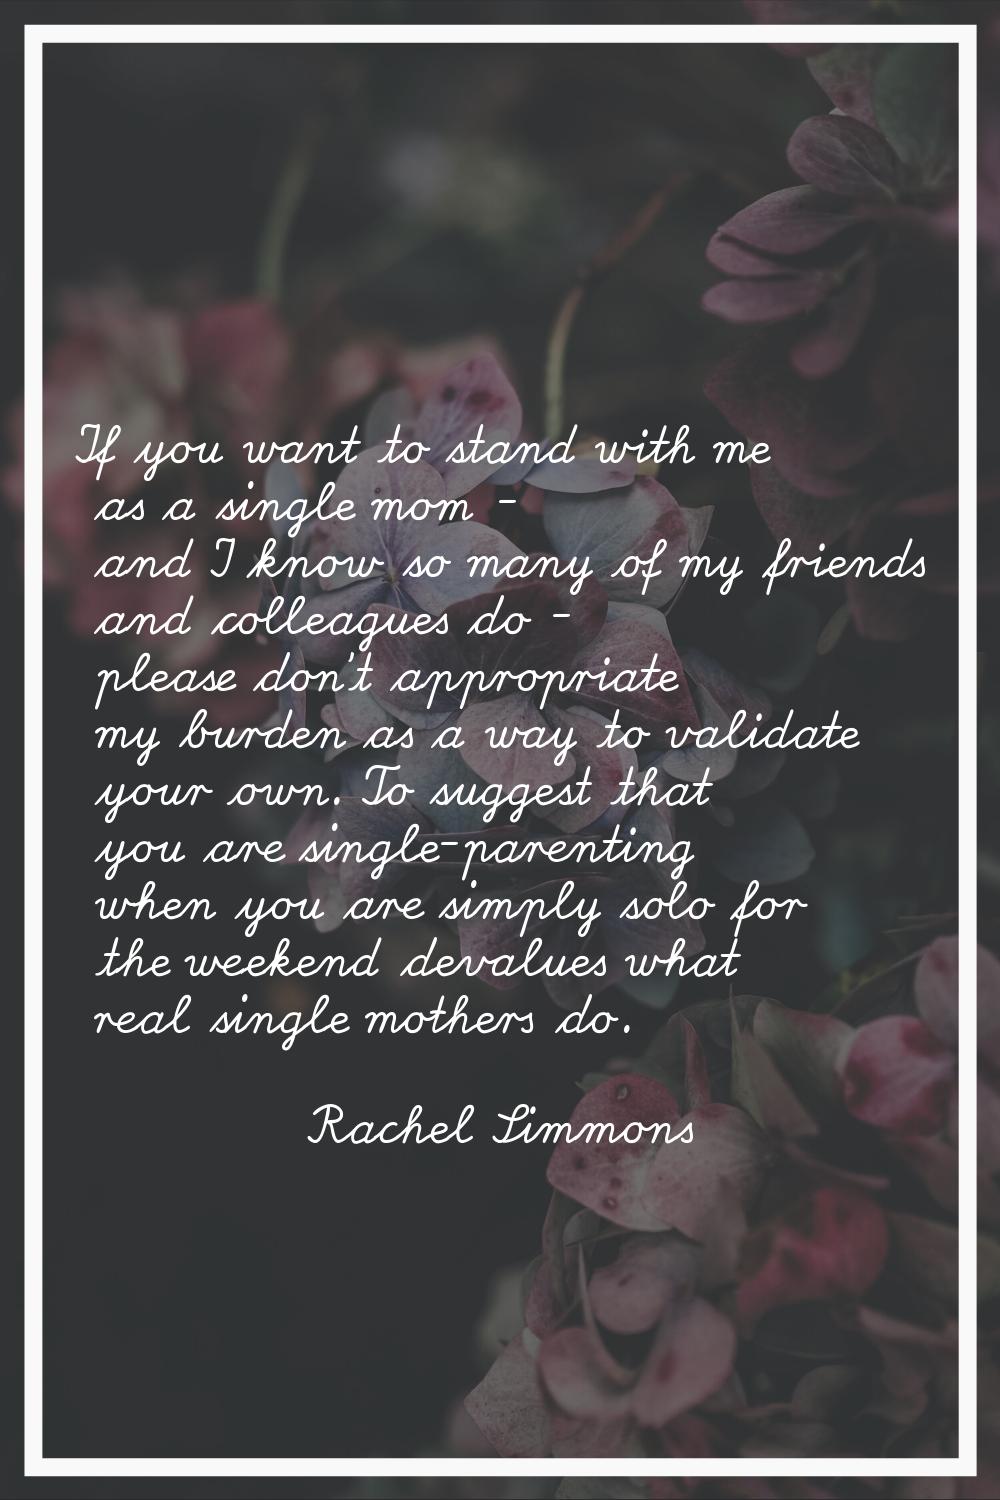 If you want to stand with me as a single mom - and I know so many of my friends and colleagues do -